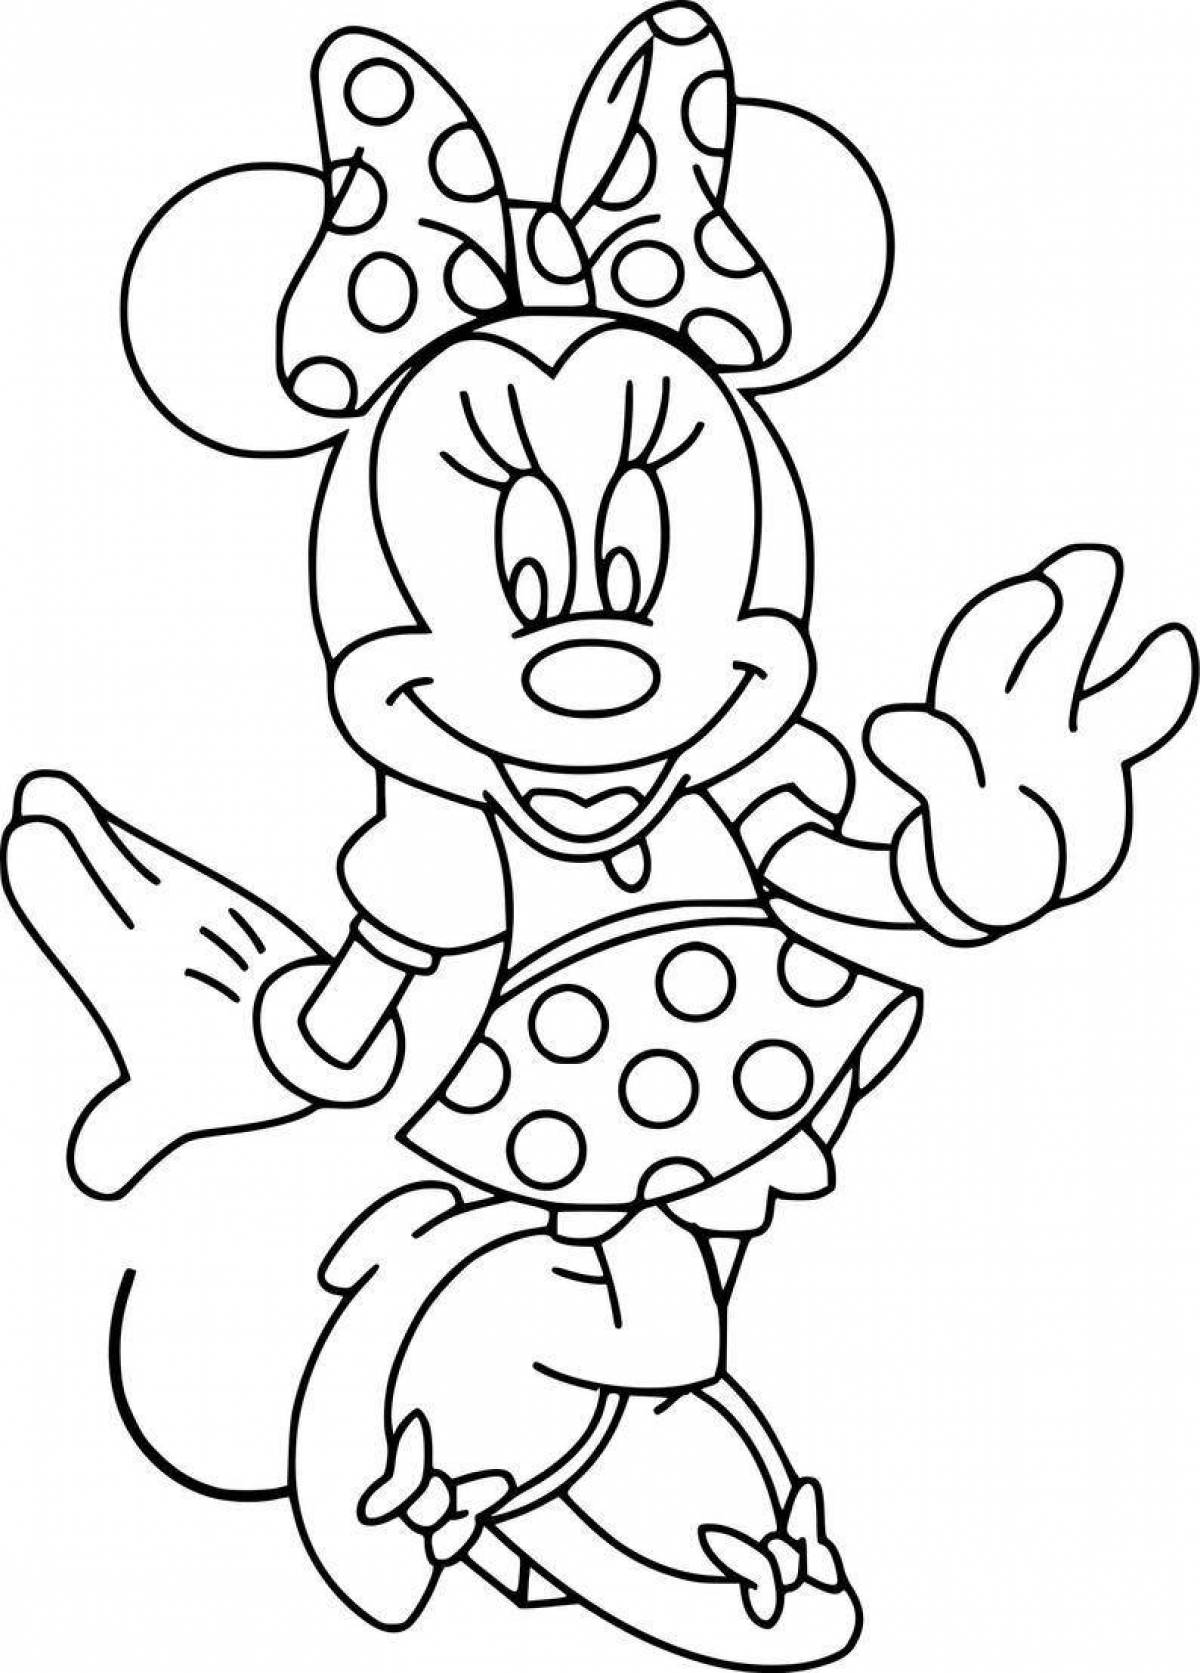 Exquisite minnie mouse coloring book